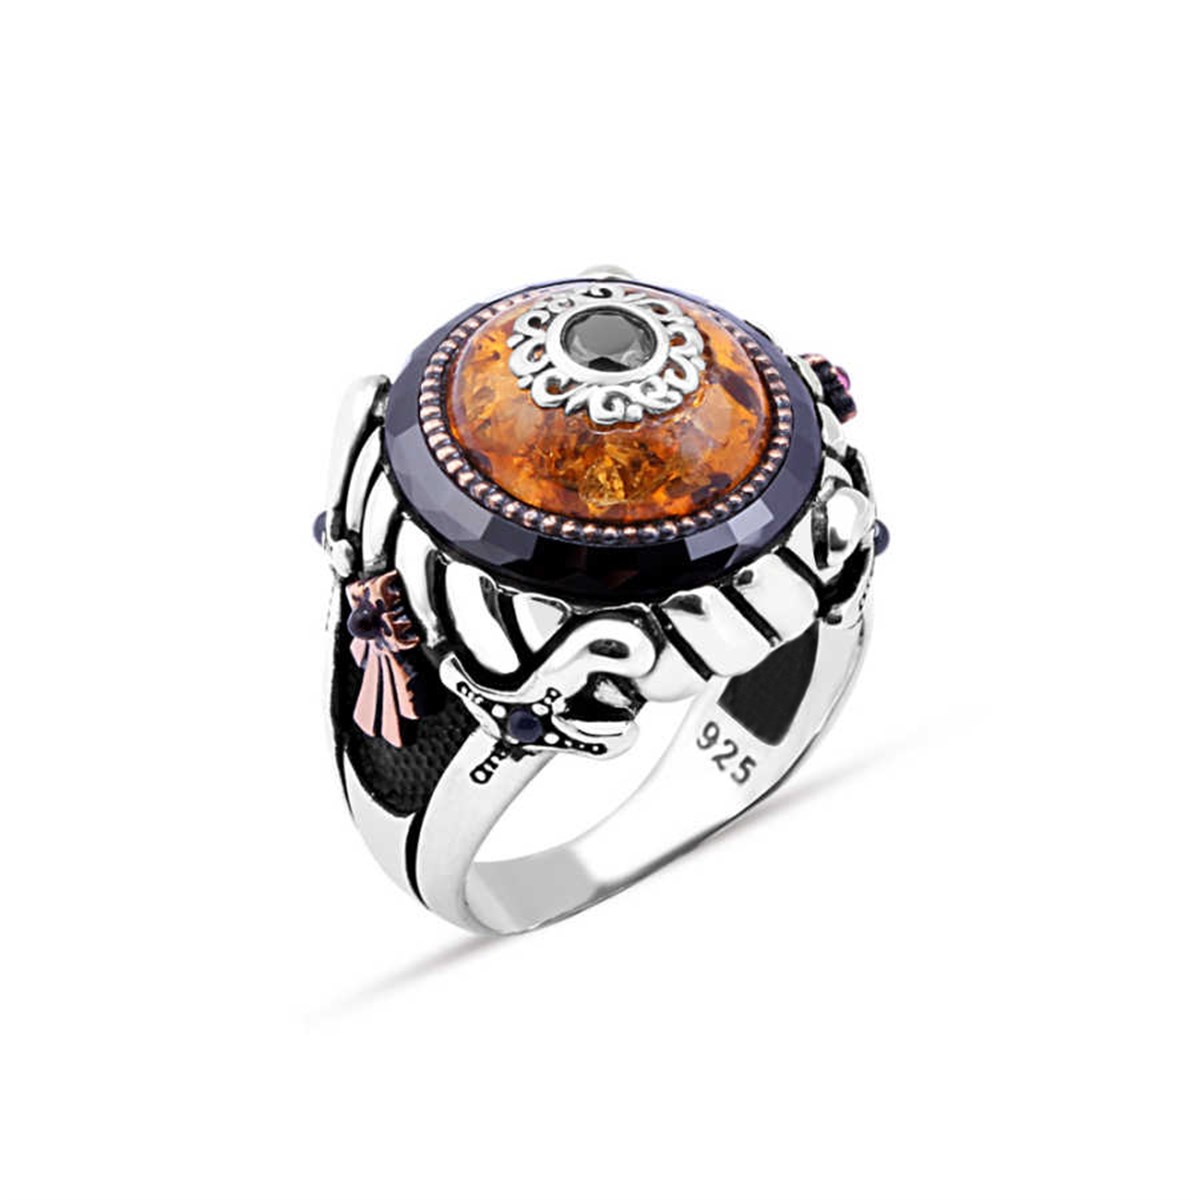 Sterling Silver Men's Ring with Synthetic Amber Stone in the Middle